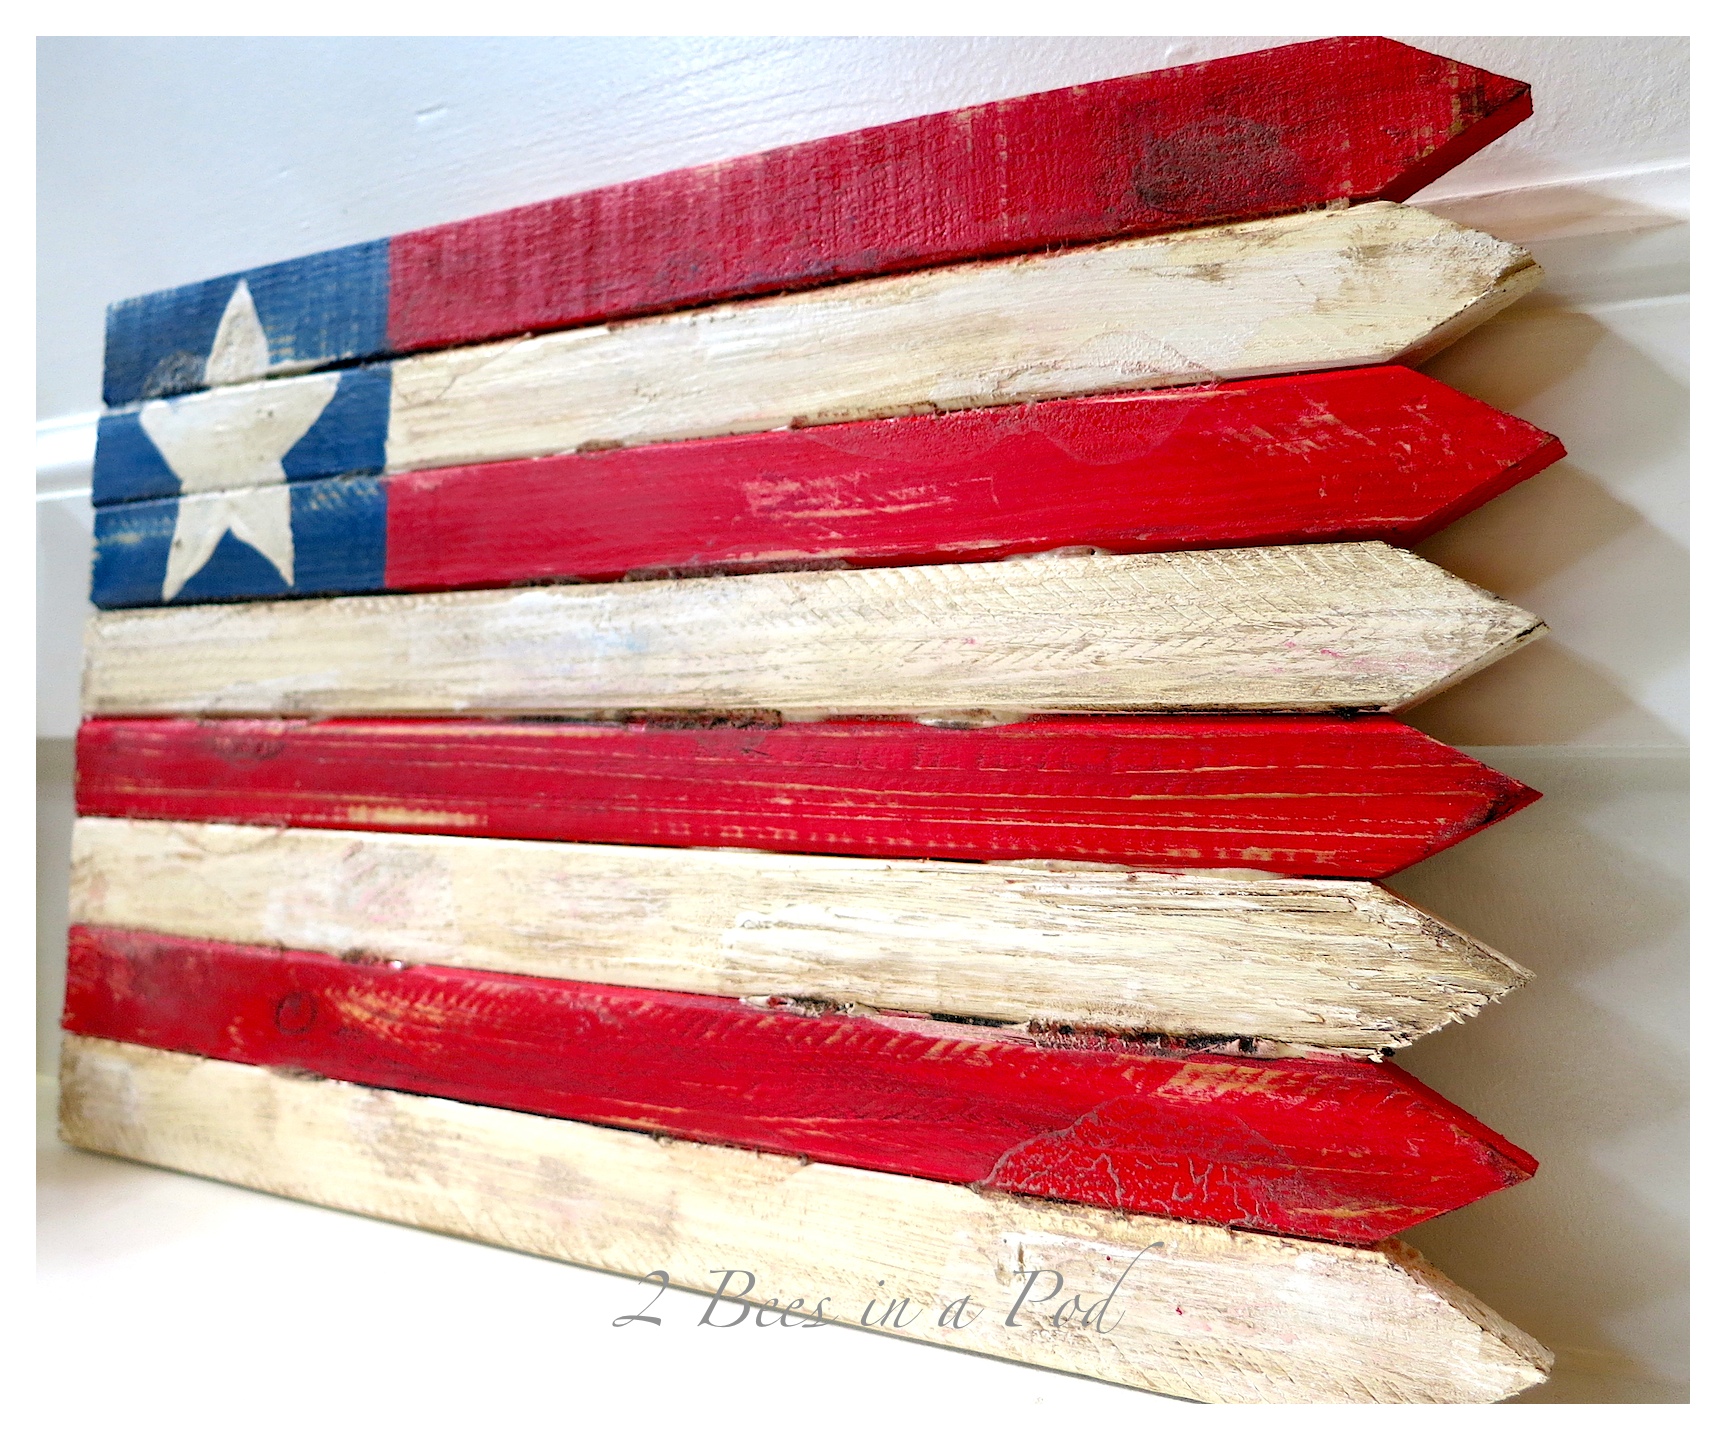 DIY tutorial - USA wooden flag made using grade stake pickets from the hardware store. Used a sander and waxes to give the flag a vintage, rustic antique finish. I'm proud to be an American :)